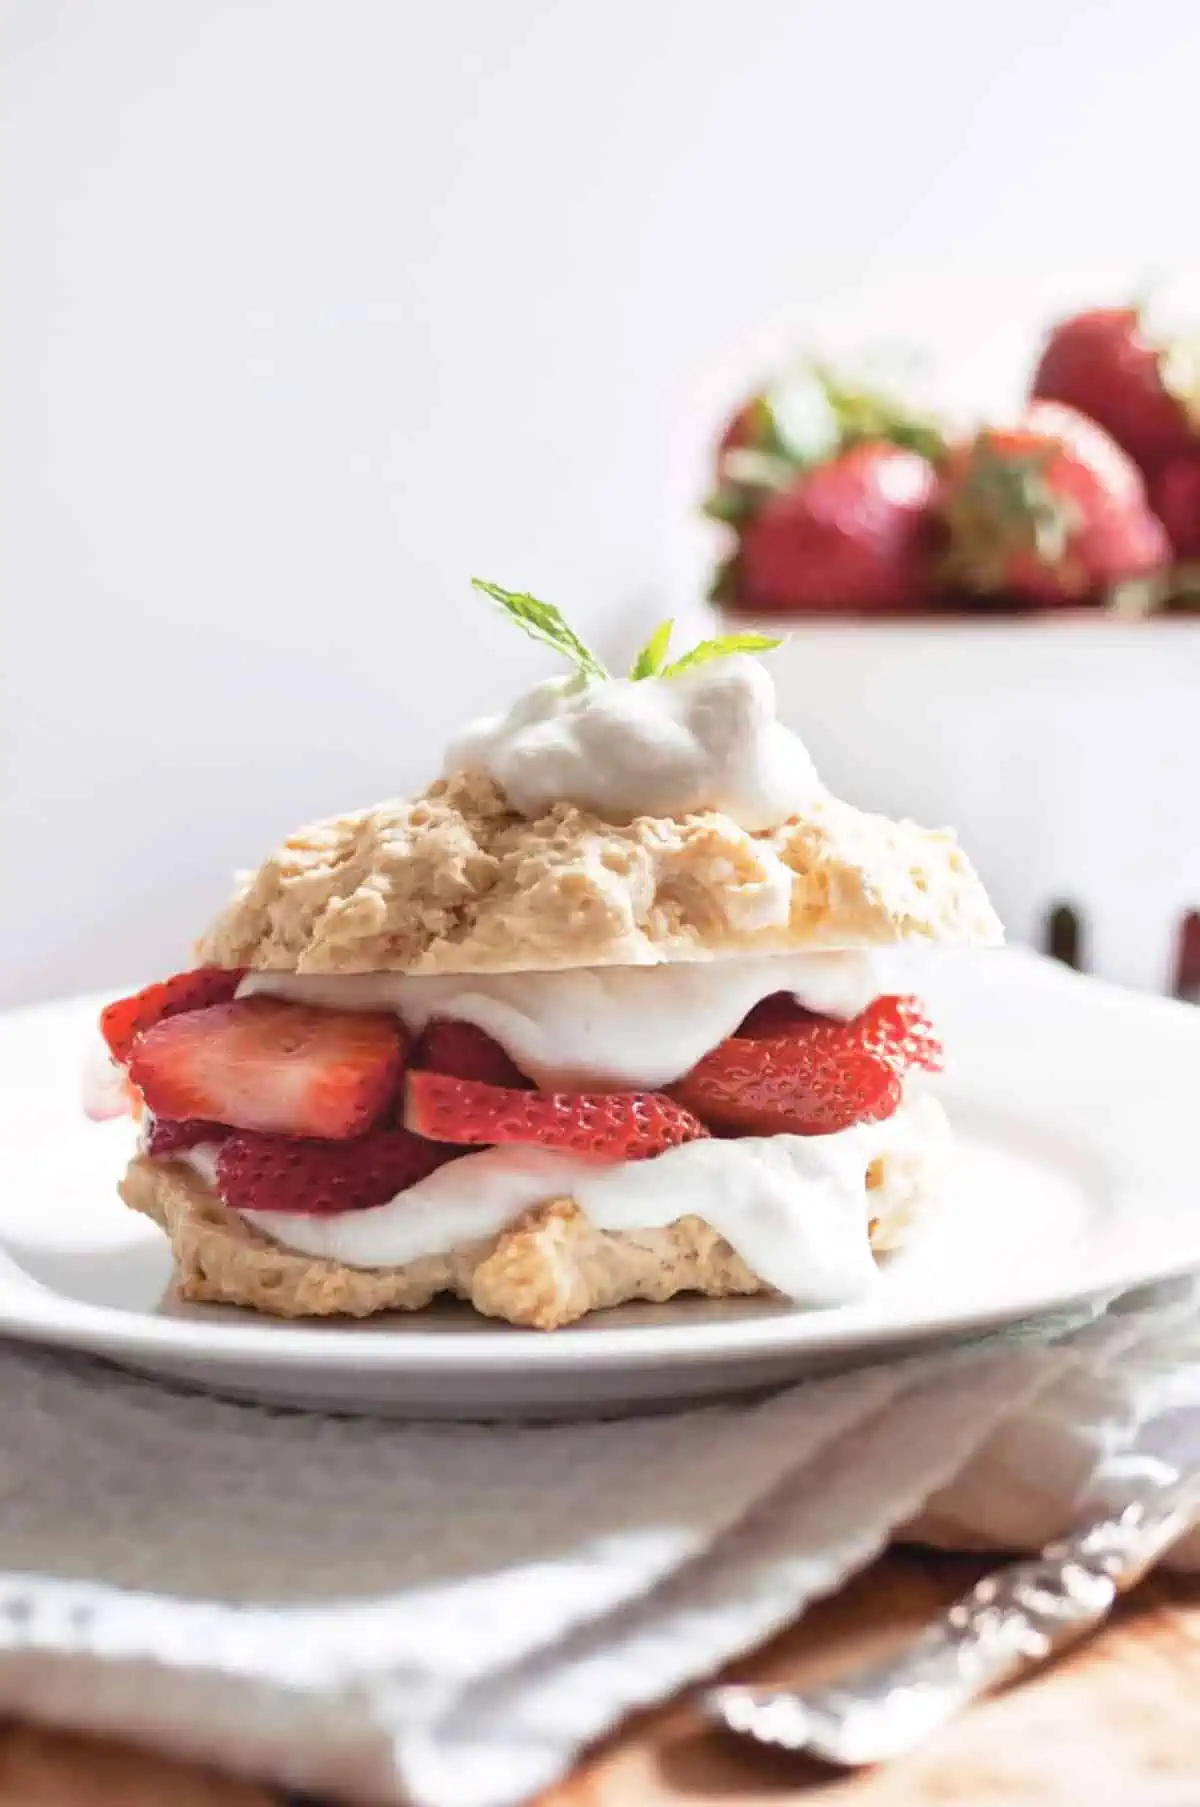 Vegan strawberry shortcake on a serving plate, topped with whipped cream.